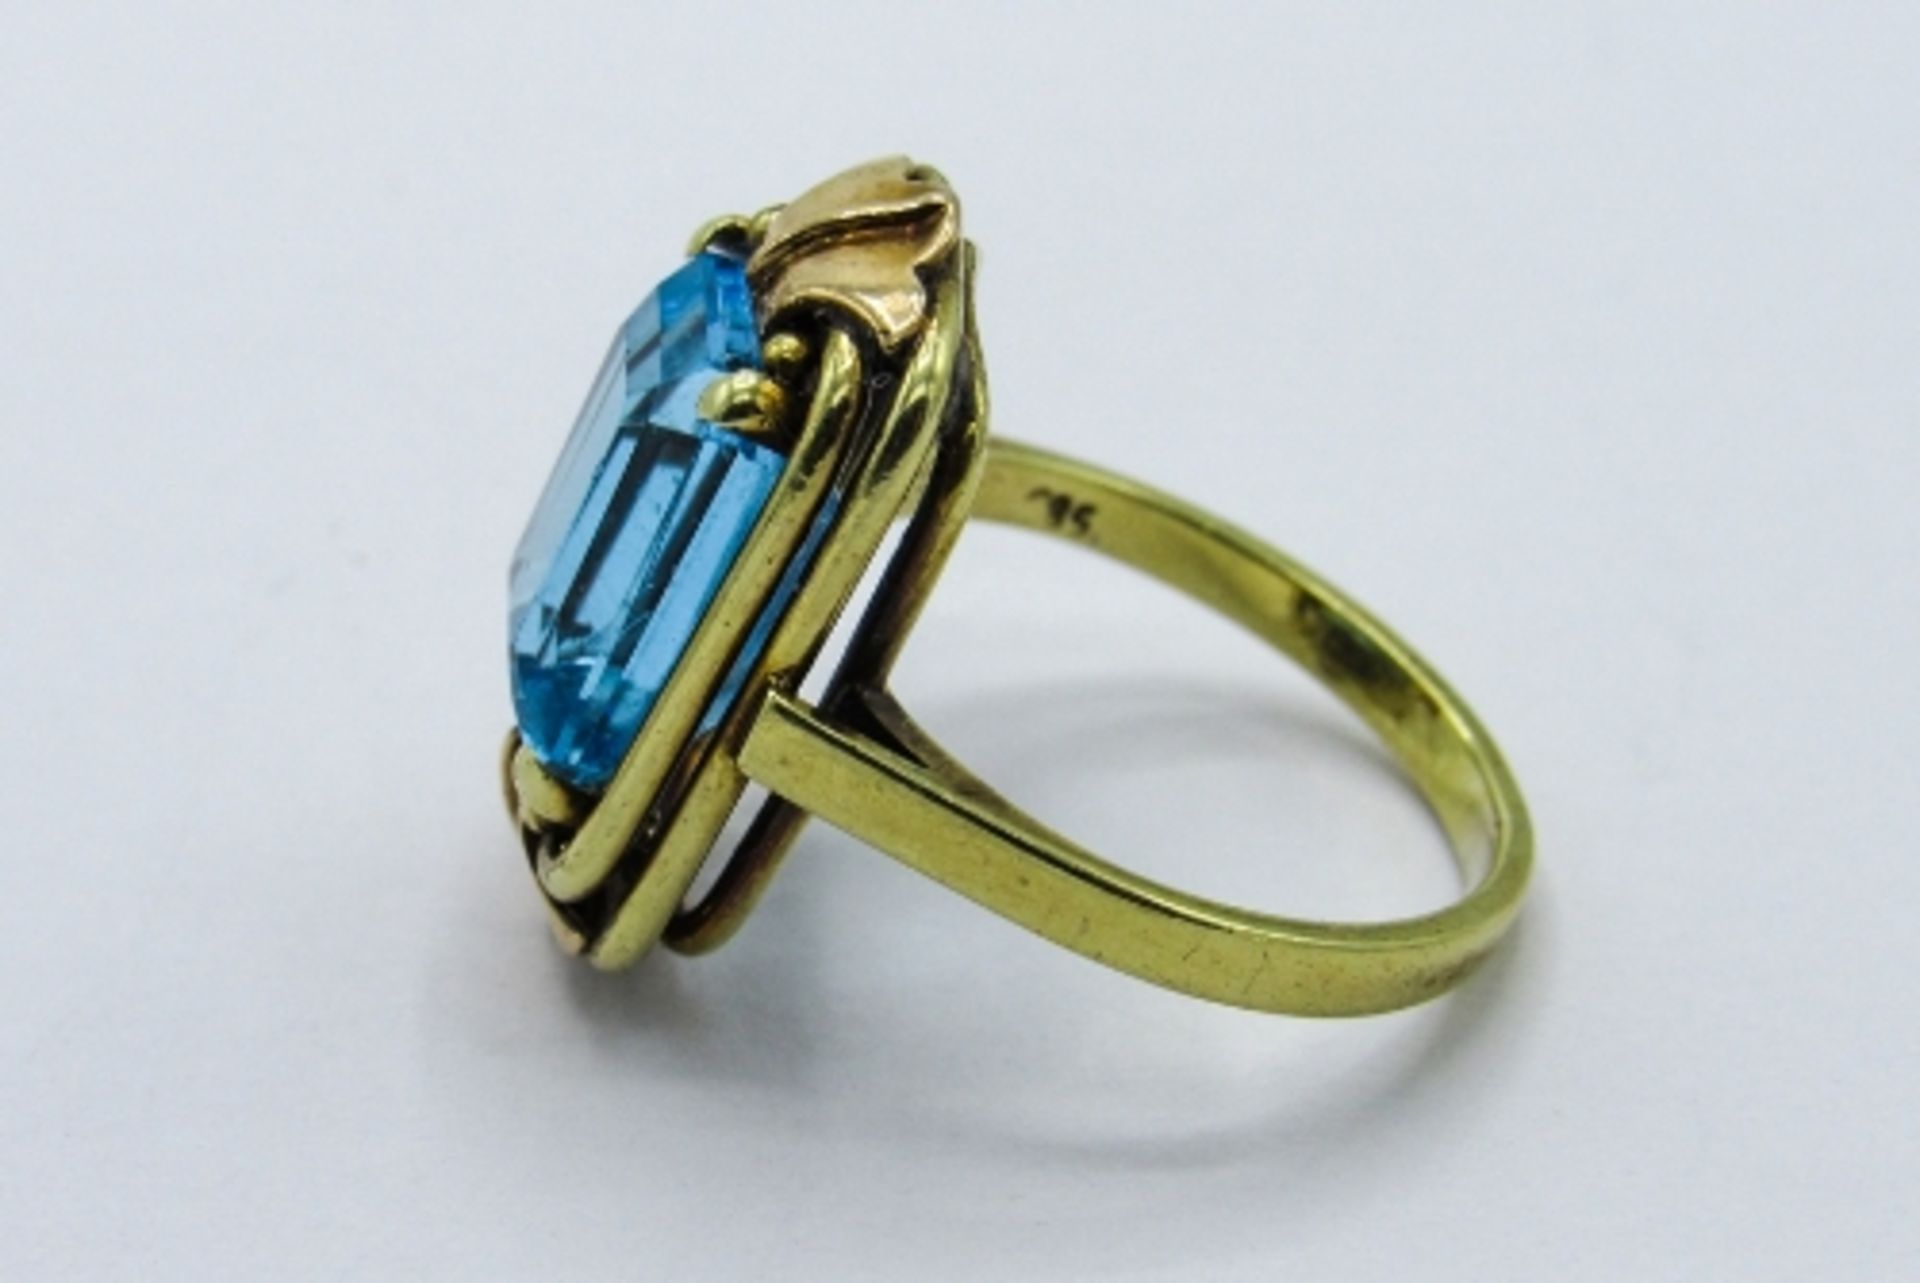 14ct gold Art Deco topaz ring, weight 6gms, size N. Estimate £275-300 - Image 3 of 5